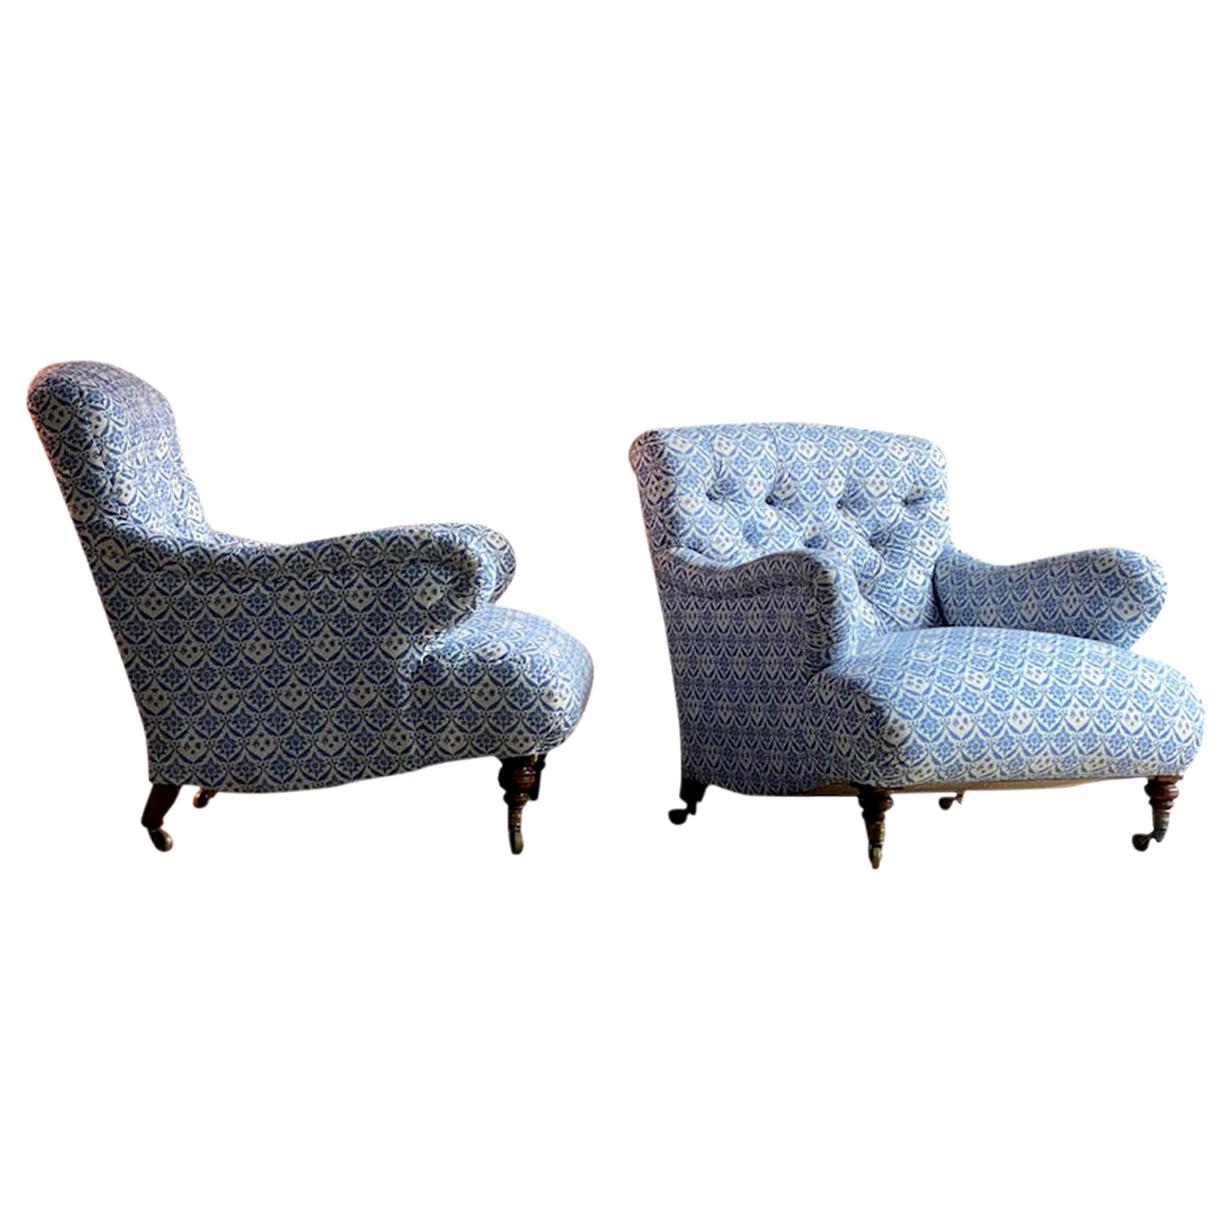 Exceptional Pair of Howard & Sons ‘Bridgewater’ Armchairs, circa 1880